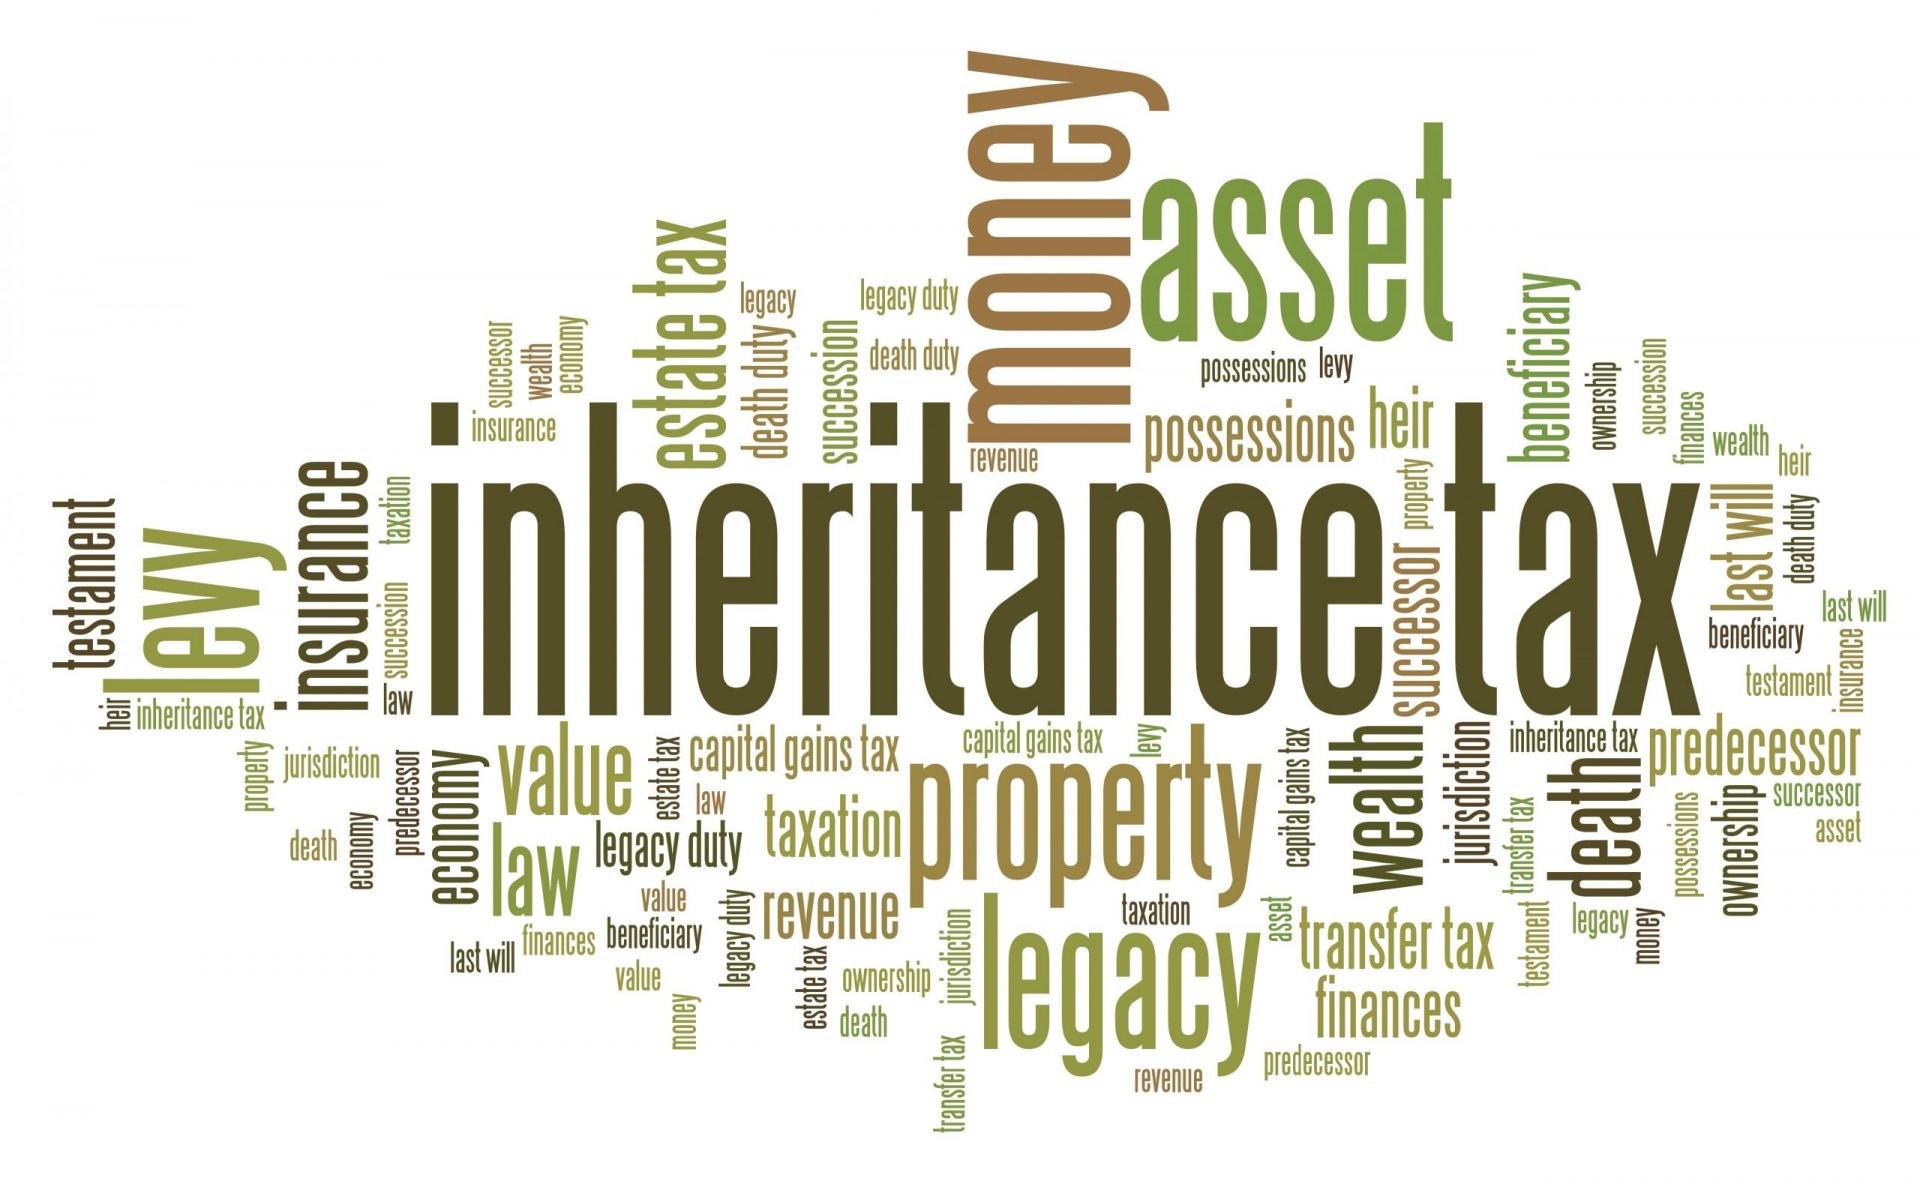 Inheritance,Tax,-,Personal,Finance,Issues,And,Concepts,Tag,Cloud